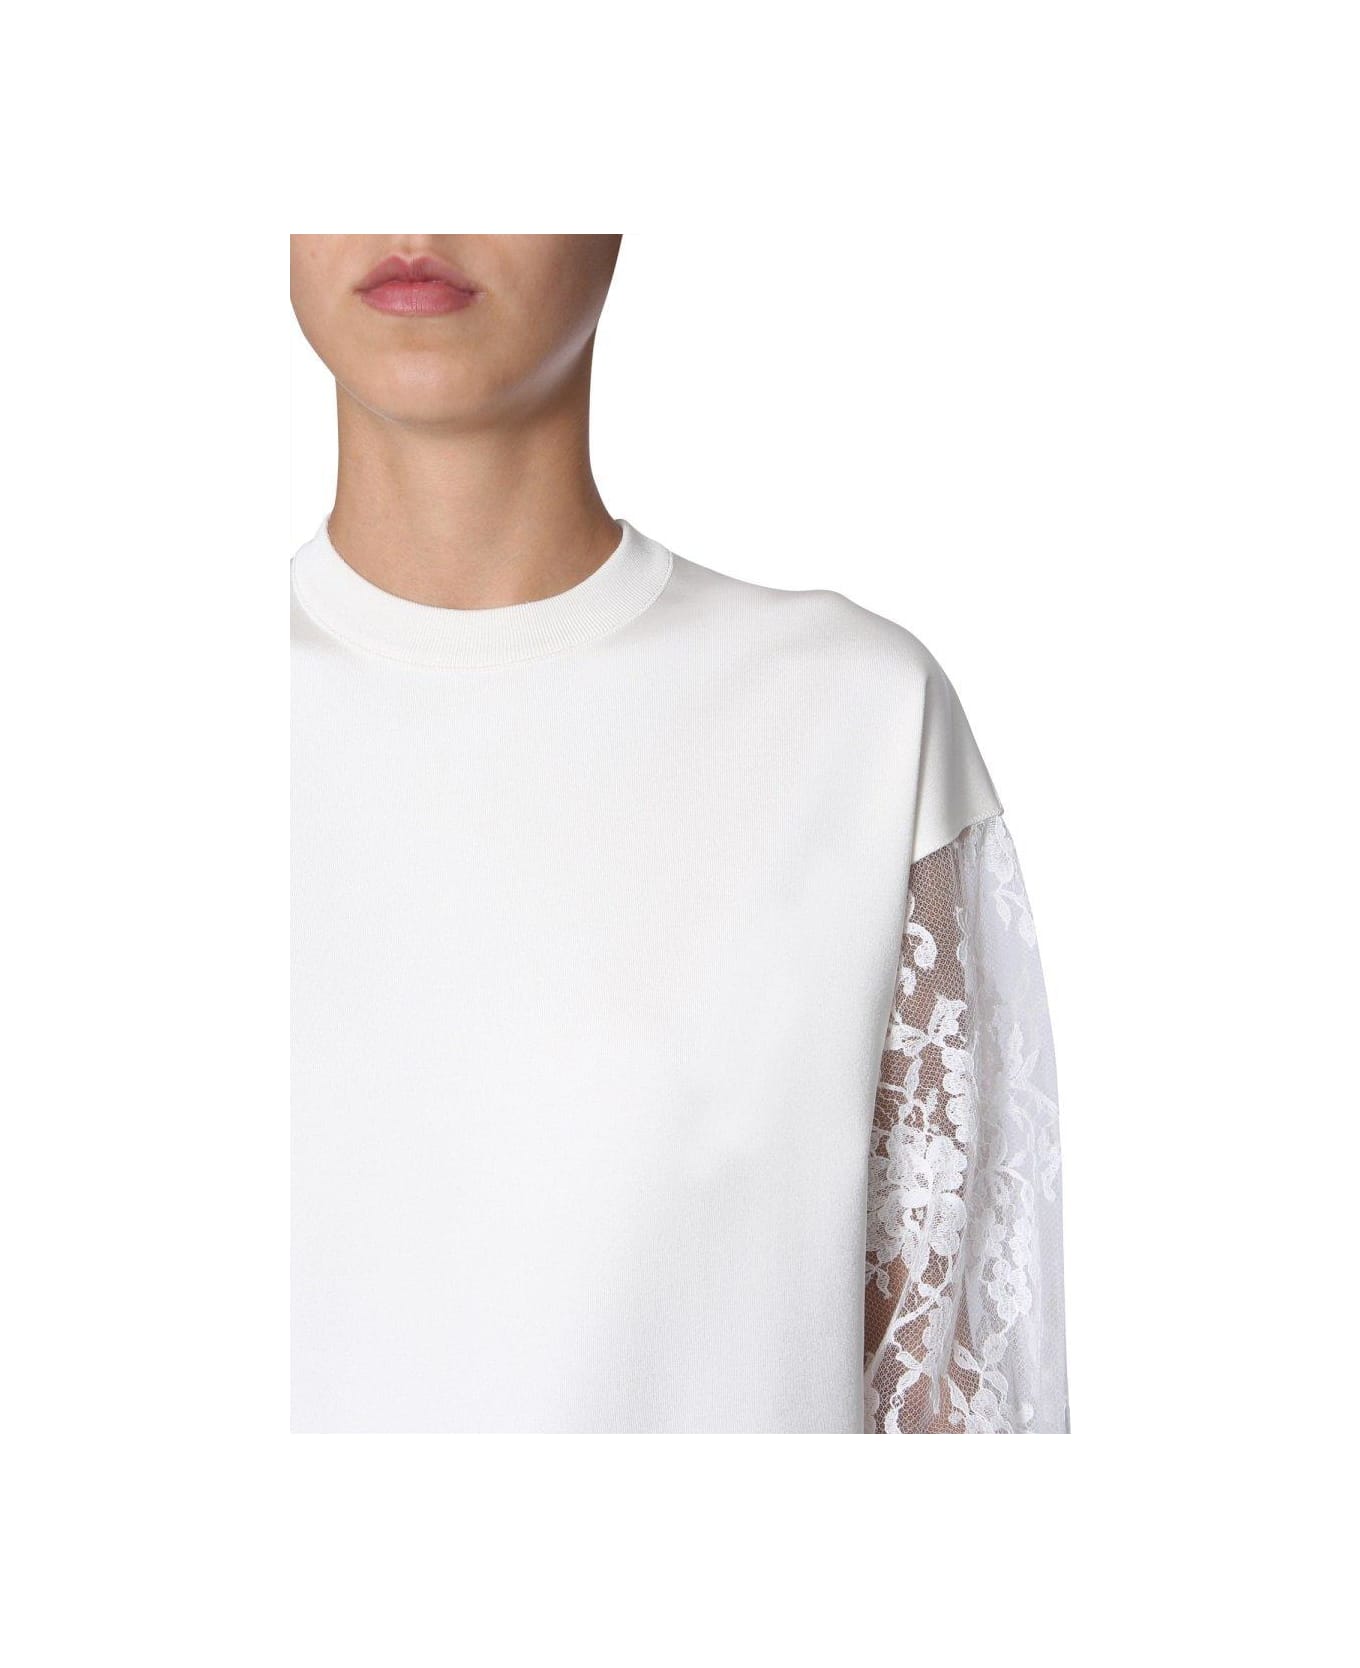 Givenchy Lace Sleeves Jumper - WHITE フリース